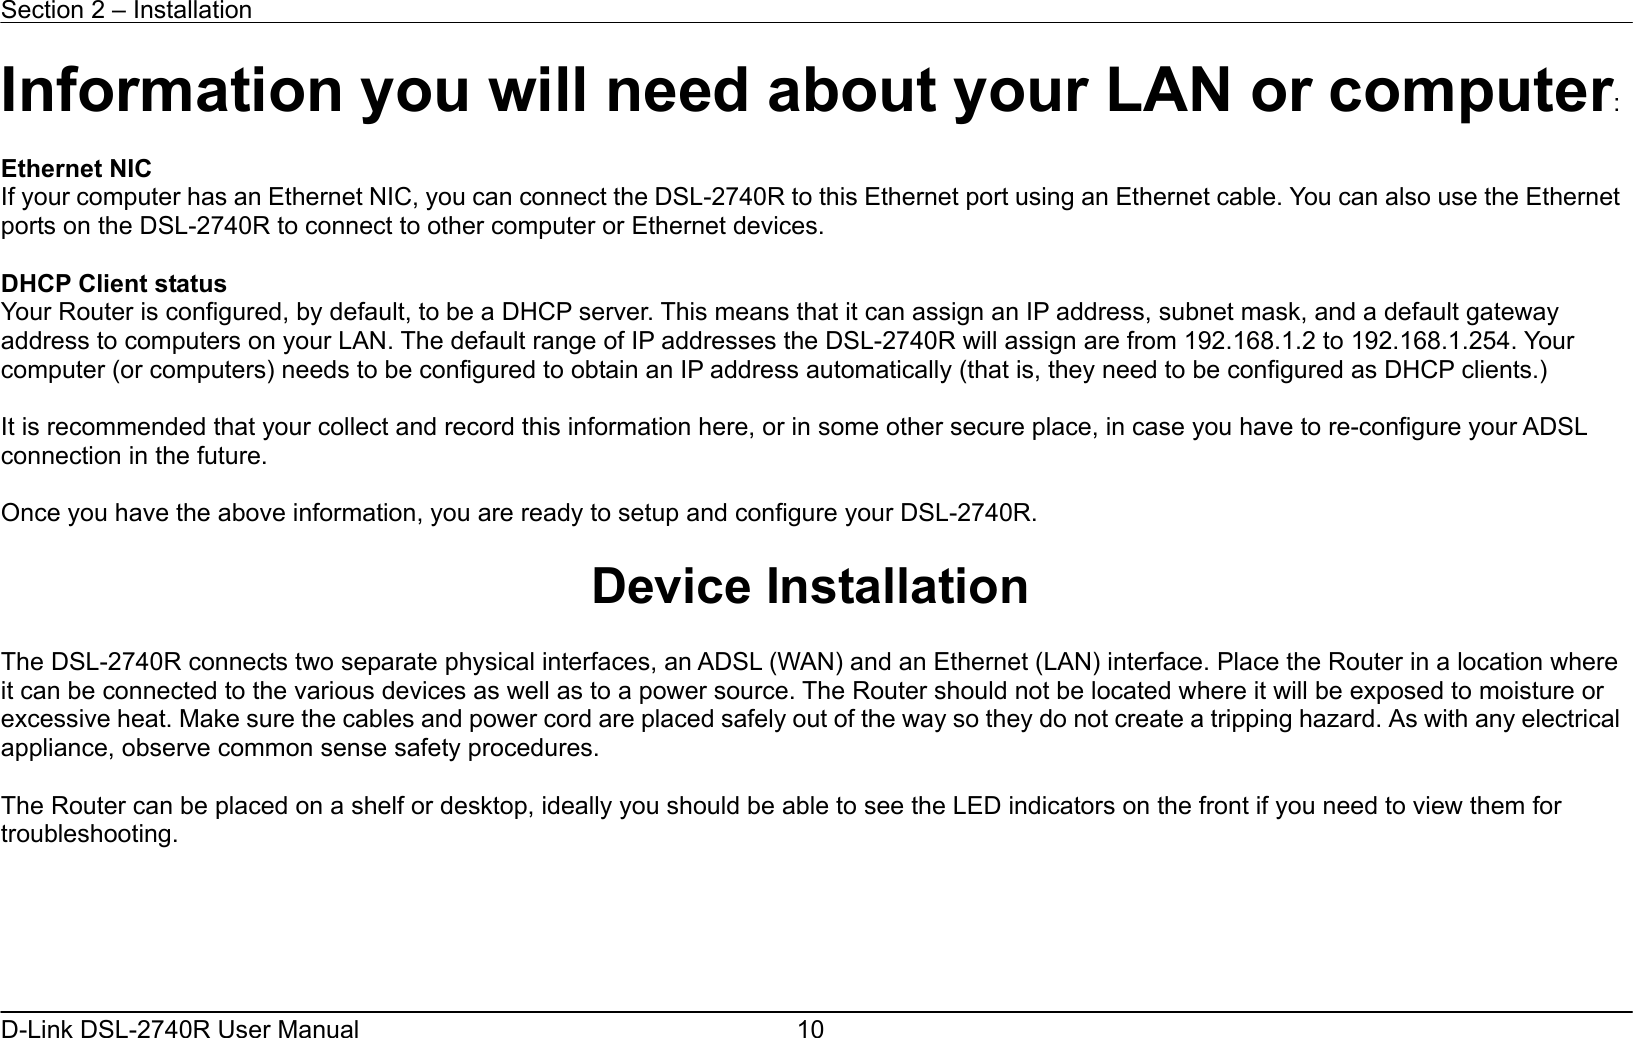 Section 2 – Installation   D-Link DSL-2740R User Manual  10Information you will need about your LAN or computer:  Ethernet NIC If your computer has an Ethernet NIC, you can connect the DSL-2740R to this Ethernet port using an Ethernet cable. You can also use the Ethernet ports on the DSL-2740R to connect to other computer or Ethernet devices.  DHCP Client status Your Router is configured, by default, to be a DHCP server. This means that it can assign an IP address, subnet mask, and a default gateway address to computers on your LAN. The default range of IP addresses the DSL-2740R will assign are from 192.168.1.2 to 192.168.1.254. Your computer (or computers) needs to be configured to obtain an IP address automatically (that is, they need to be configured as DHCP clients.)      It is recommended that your collect and record this information here, or in some other secure place, in case you have to re-configure your ADSL connection in the future.  Once you have the above information, you are ready to setup and configure your DSL-2740R.  Device Installation  The DSL-2740R connects two separate physical interfaces, an ADSL (WAN) and an Ethernet (LAN) interface. Place the Router in a location where it can be connected to the various devices as well as to a power source. The Router should not be located where it will be exposed to moisture or excessive heat. Make sure the cables and power cord are placed safely out of the way so they do not create a tripping hazard. As with any electrical appliance, observe common sense safety procedures.  The Router can be placed on a shelf or desktop, ideally you should be able to see the LED indicators on the front if you need to view them for troubleshooting.      